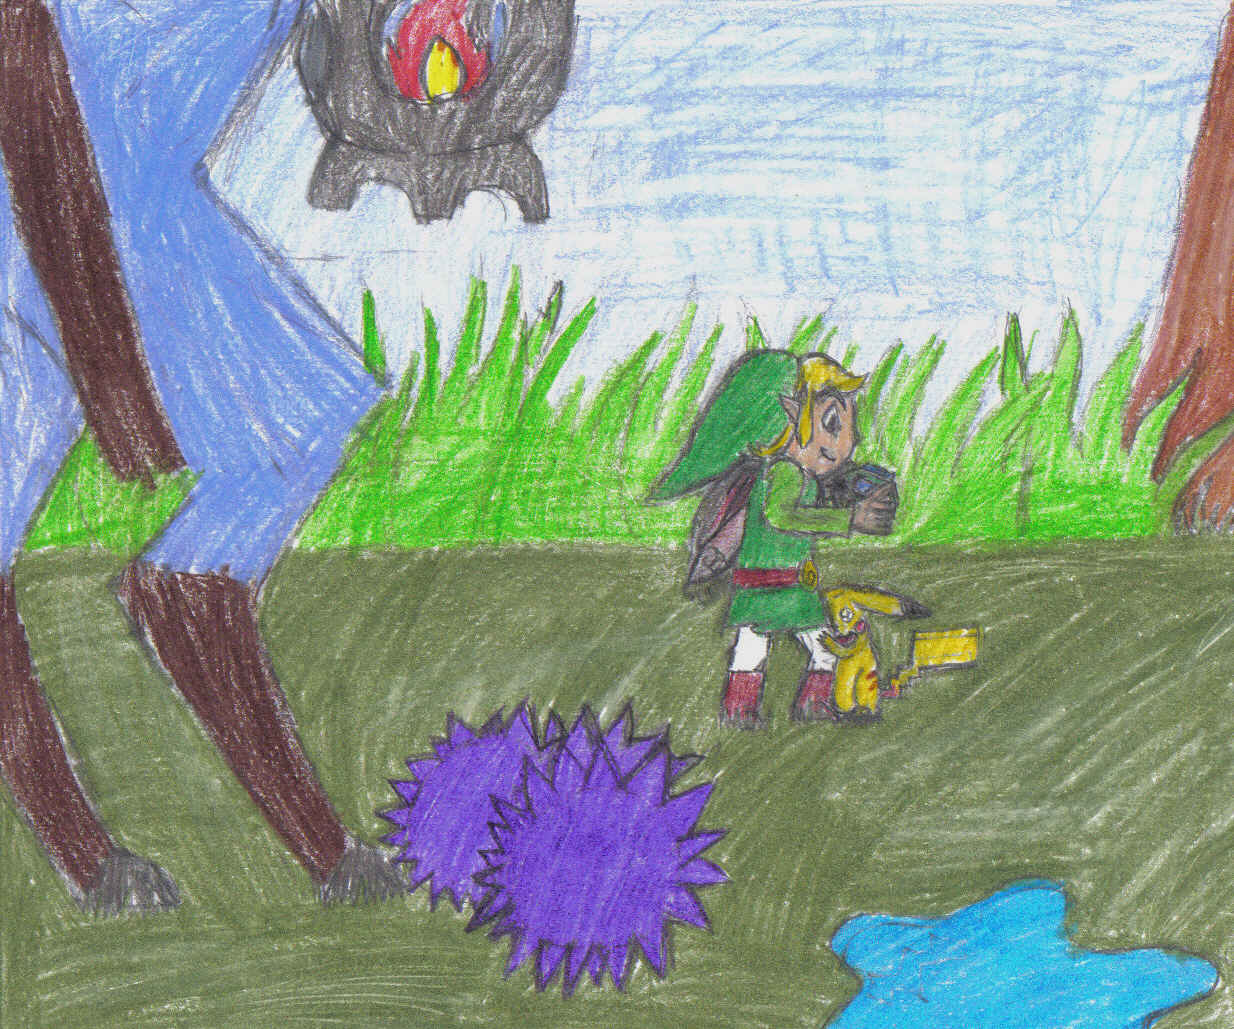 Link and pikachu by lilshadowlover642